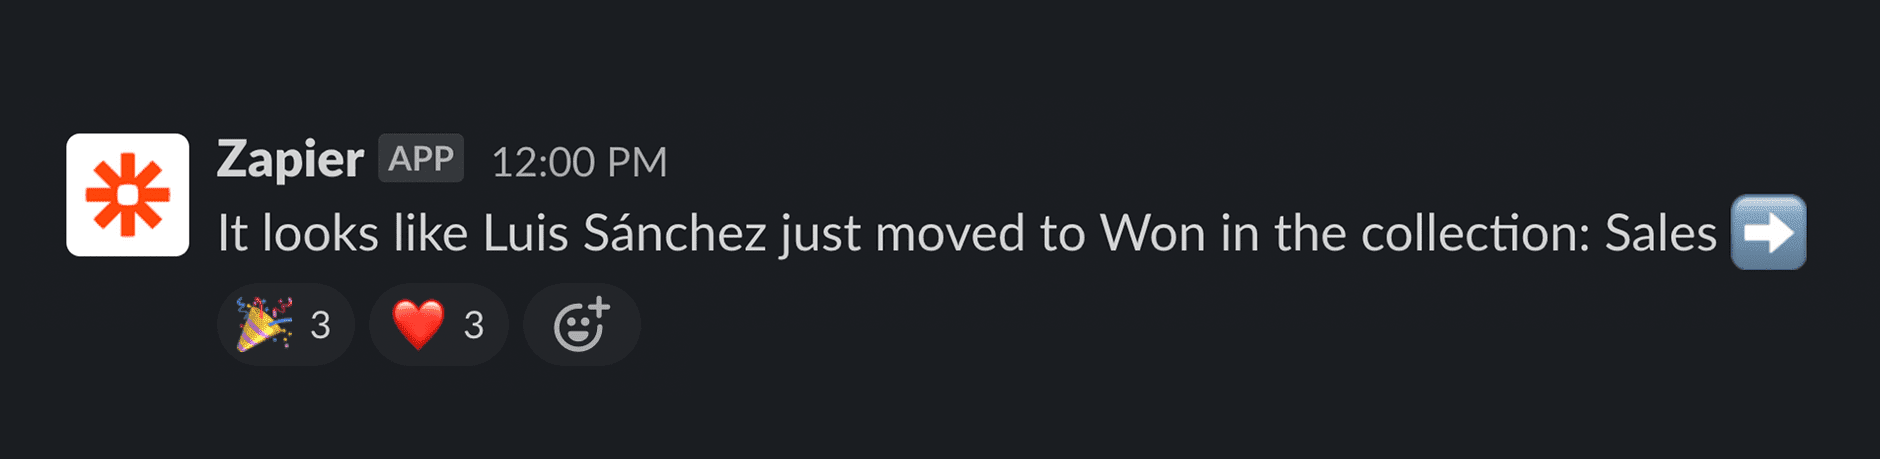 Our example Slack message - posted by a Zapier bot, reads 'It looks like Luis Sanchez just moved to Won in the collection sales'. Several emoji reactions are visible too.